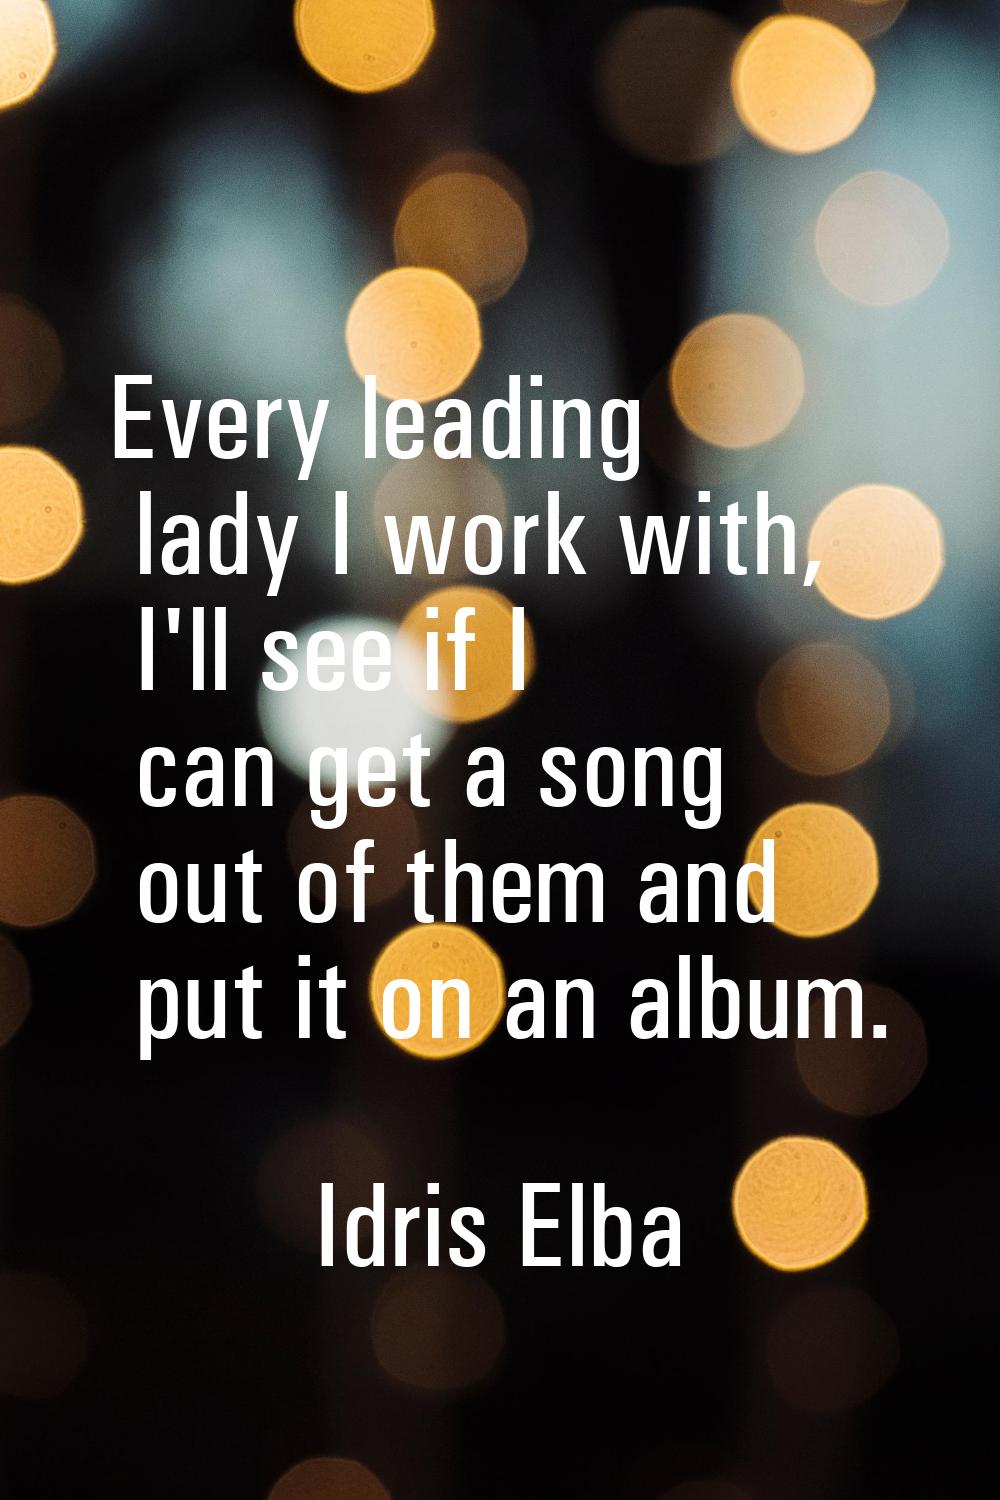 Every leading lady I work with, I'll see if I can get a song out of them and put it on an album.